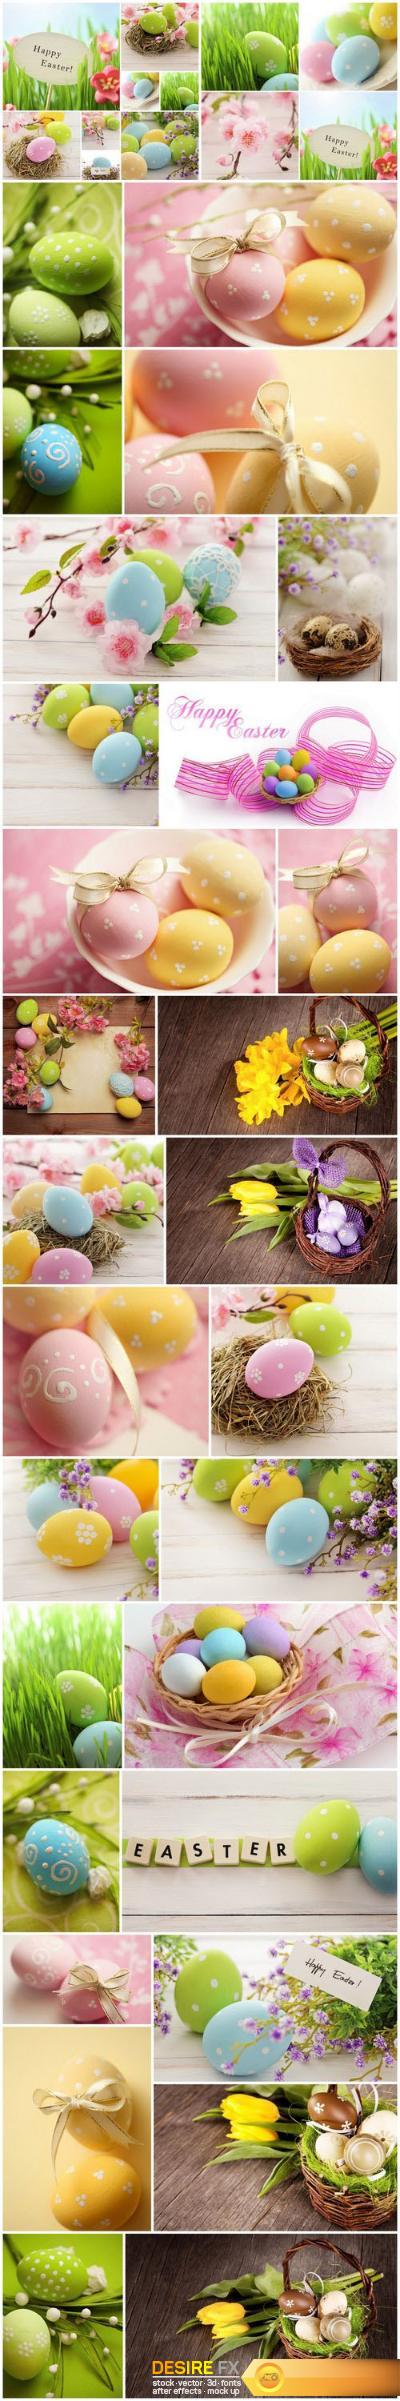 Easter Eggs and Happy Easter 3 - Set of 30xUHQ JPEG Professional Stock Images